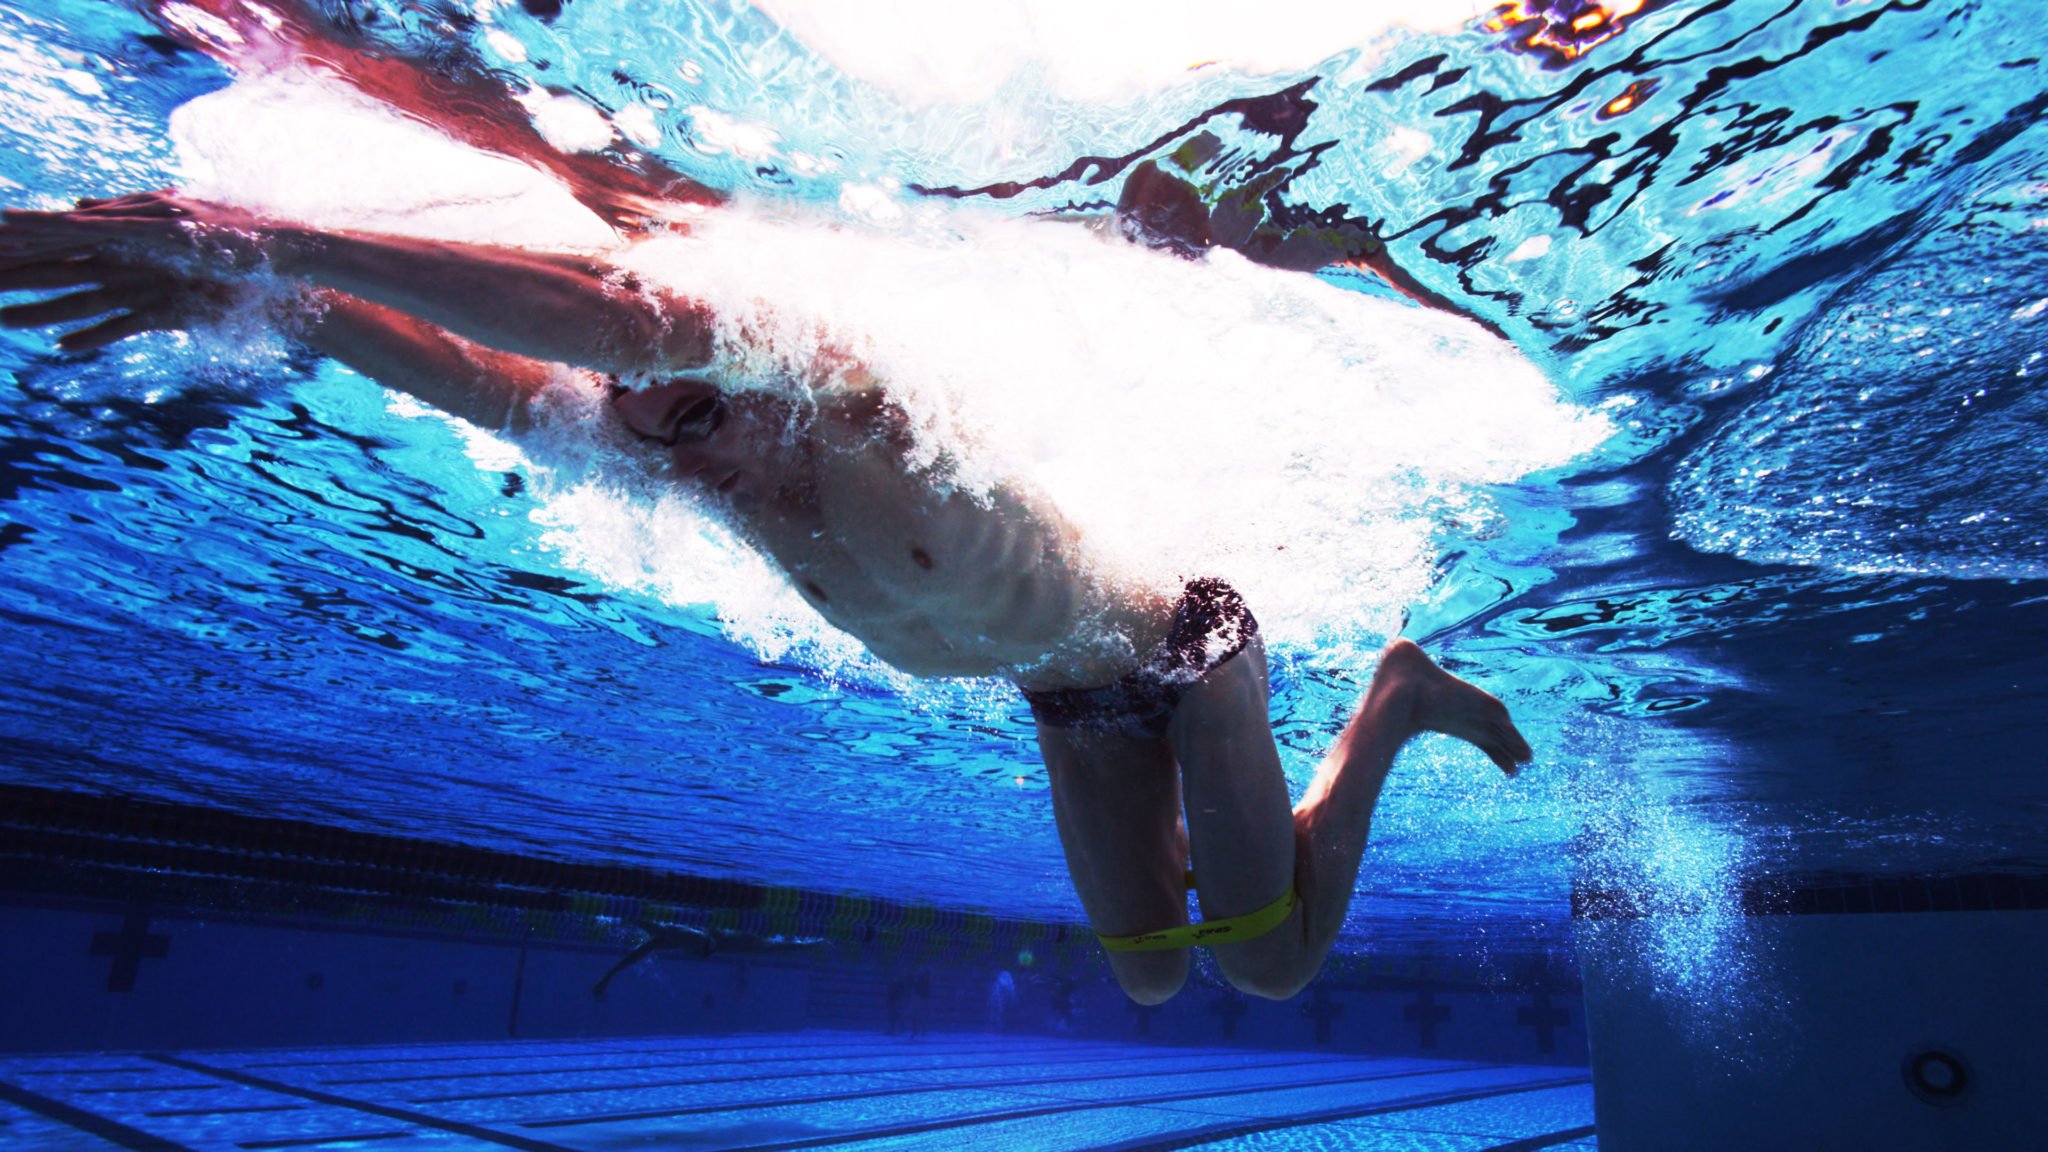 Breaststroke cycle pull-through and recovery of the right side